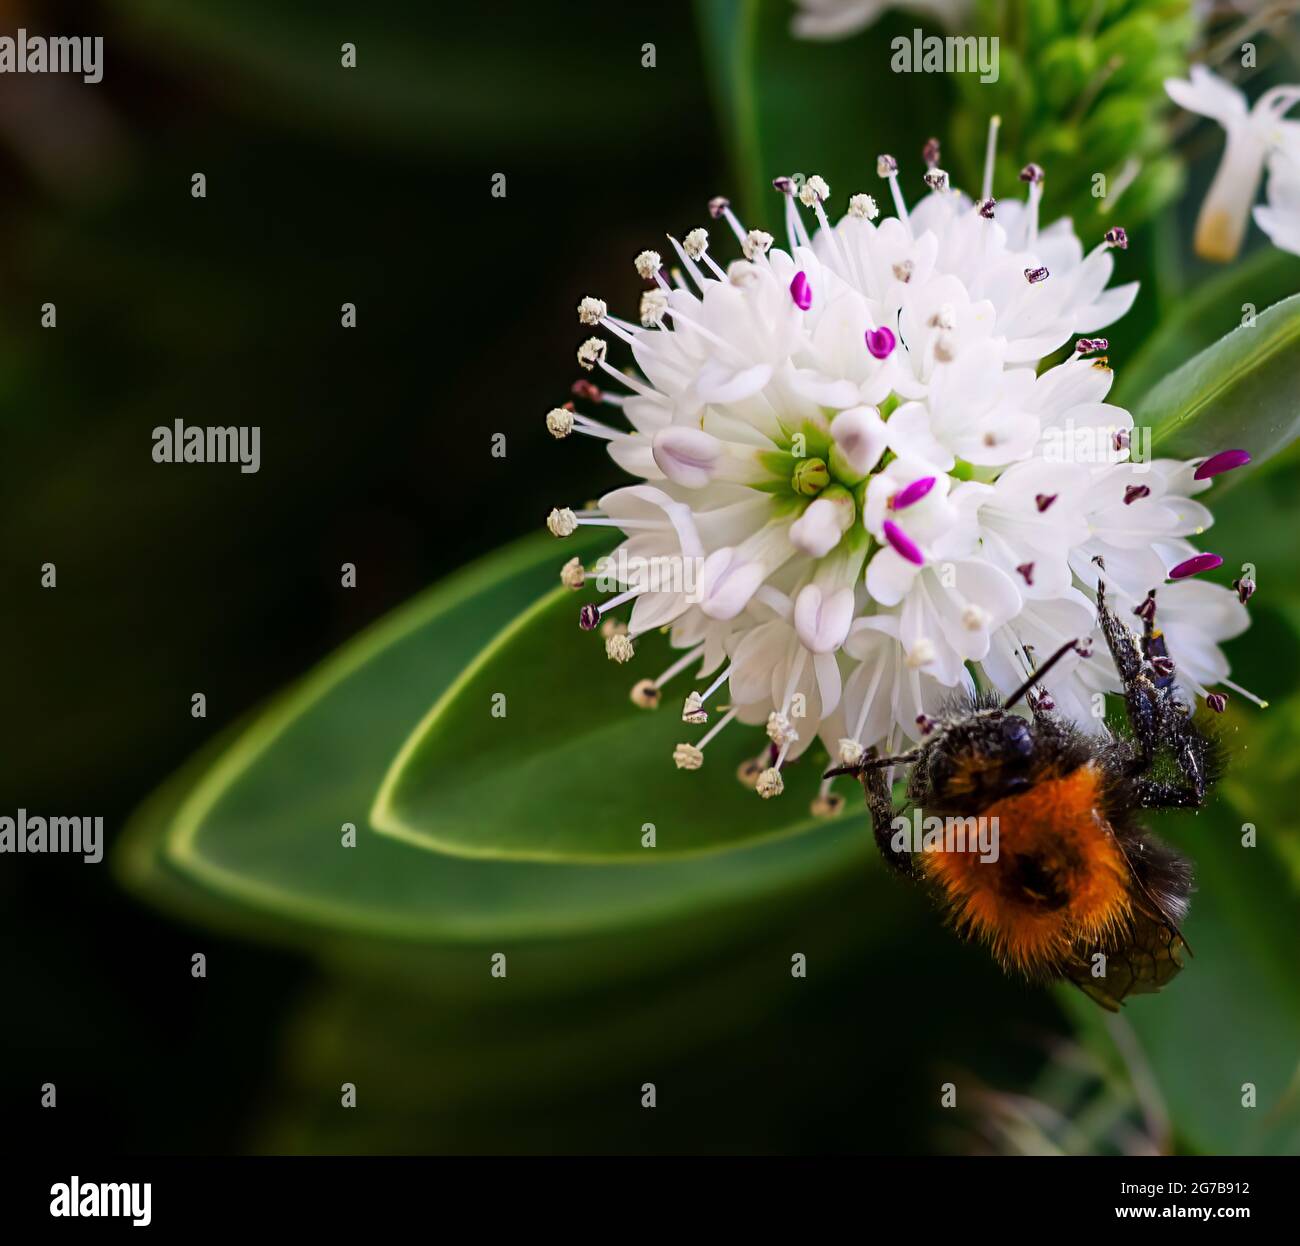 Close-Up Of A Bee Busily Collecting Pollen From A Hee Bee Flower Stock Photo